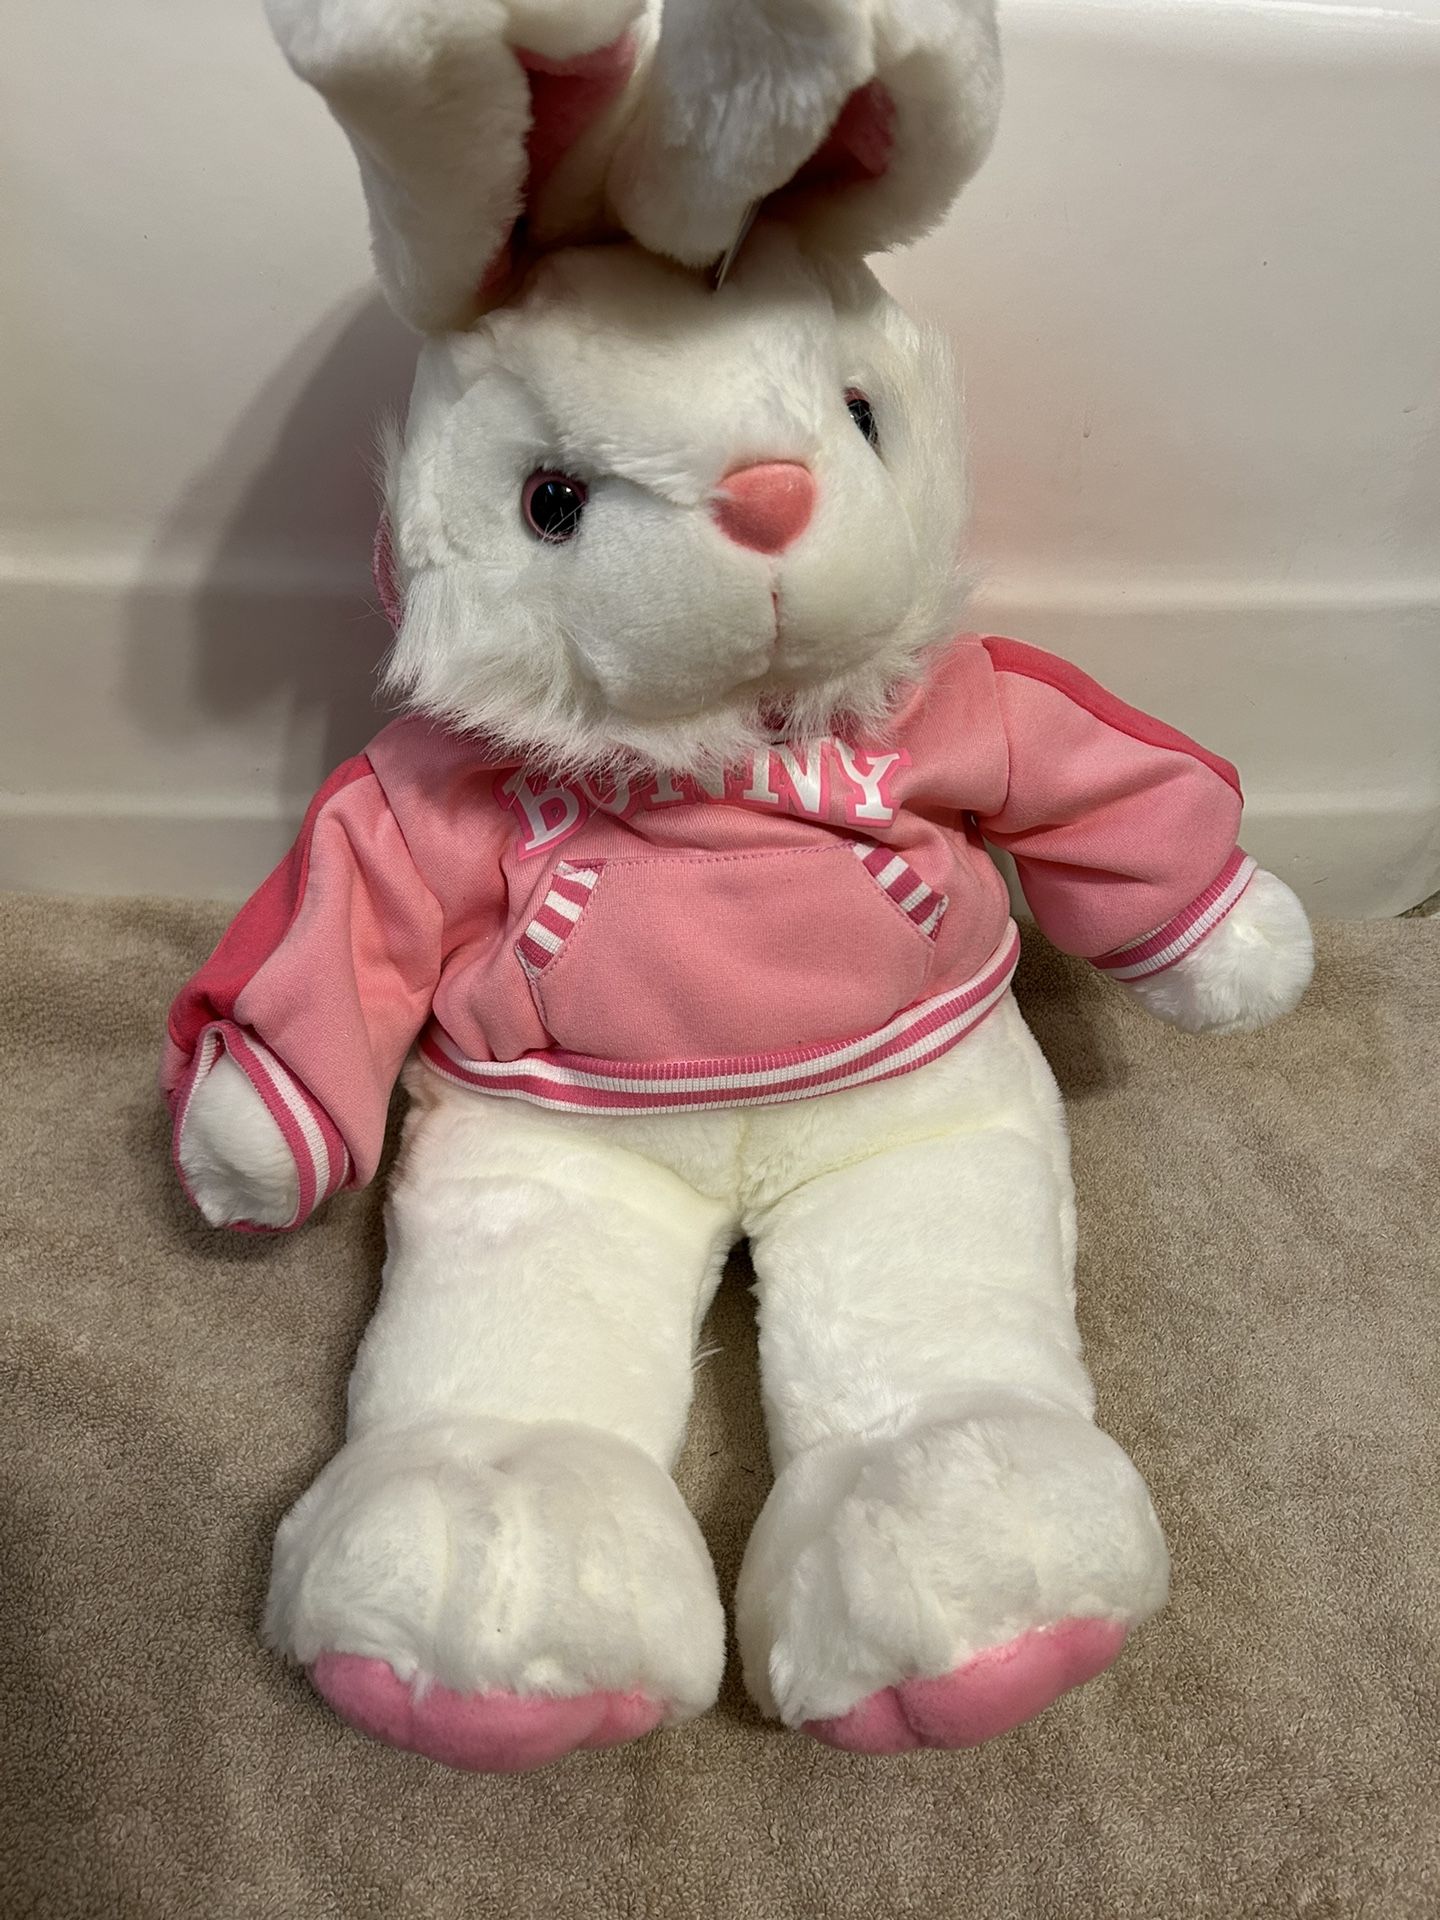 New Pink Easter Bunny Stuff Animal With Hoodie That Reads”Bunny”Measures 26” Length